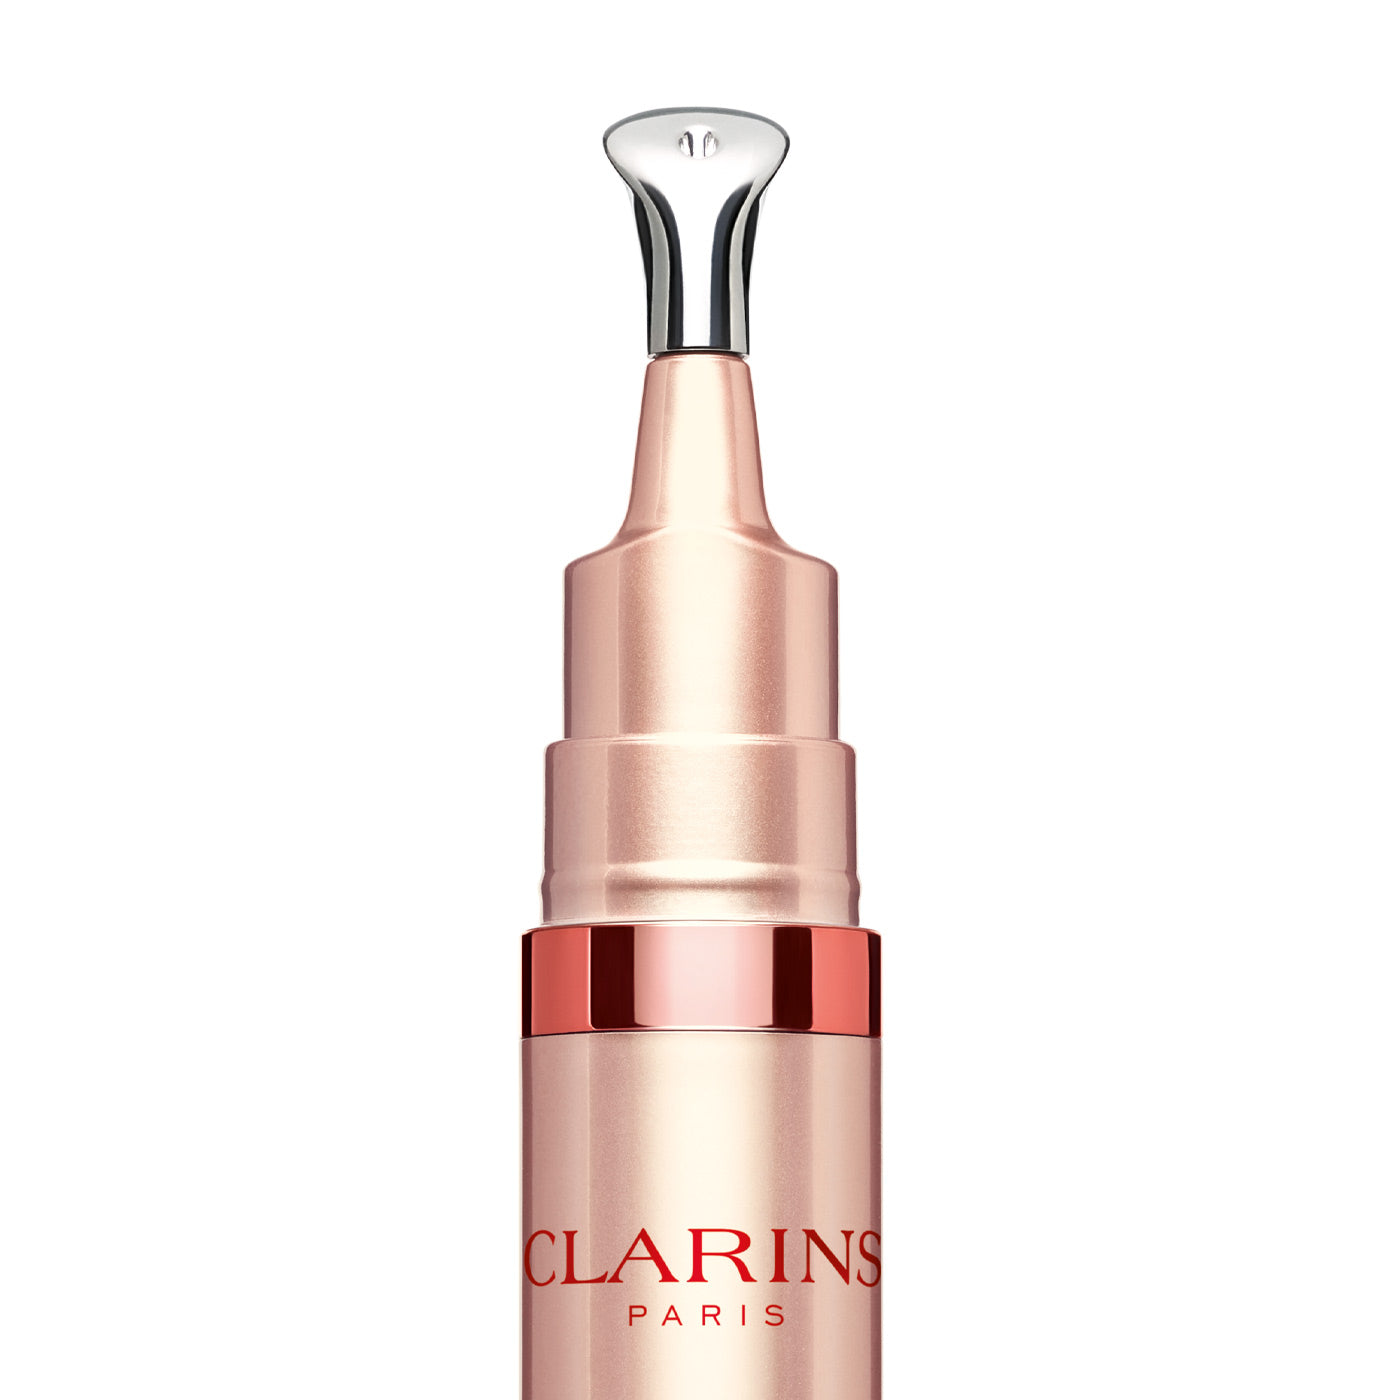 CLARINS V Shaping Facial Lift Tightening & Anti-Puffiness Eye Concentrate 15mL